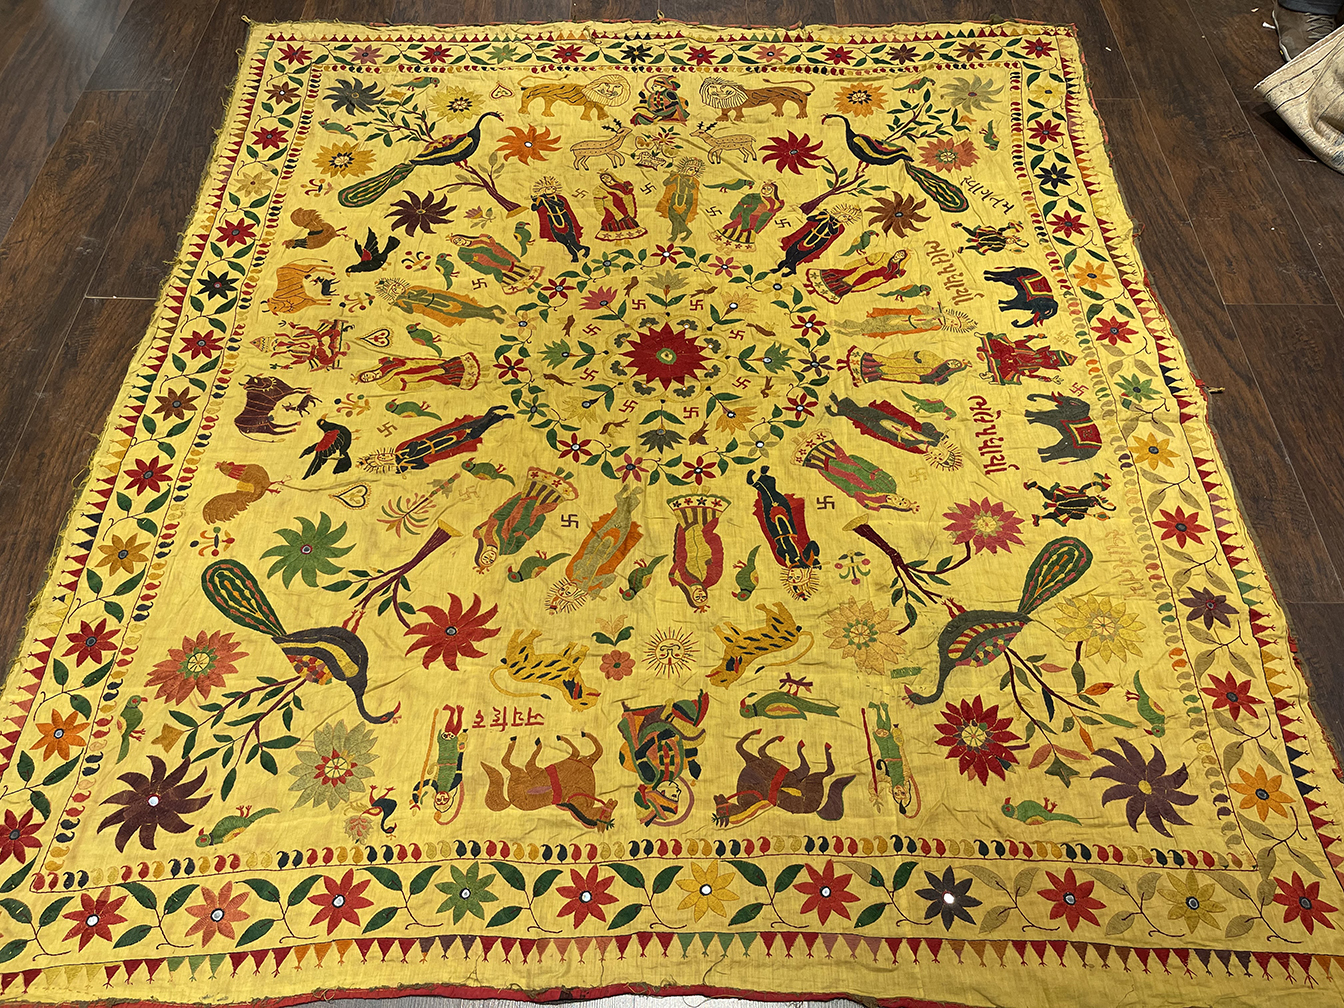 Antique embroidery Rug - # 56517